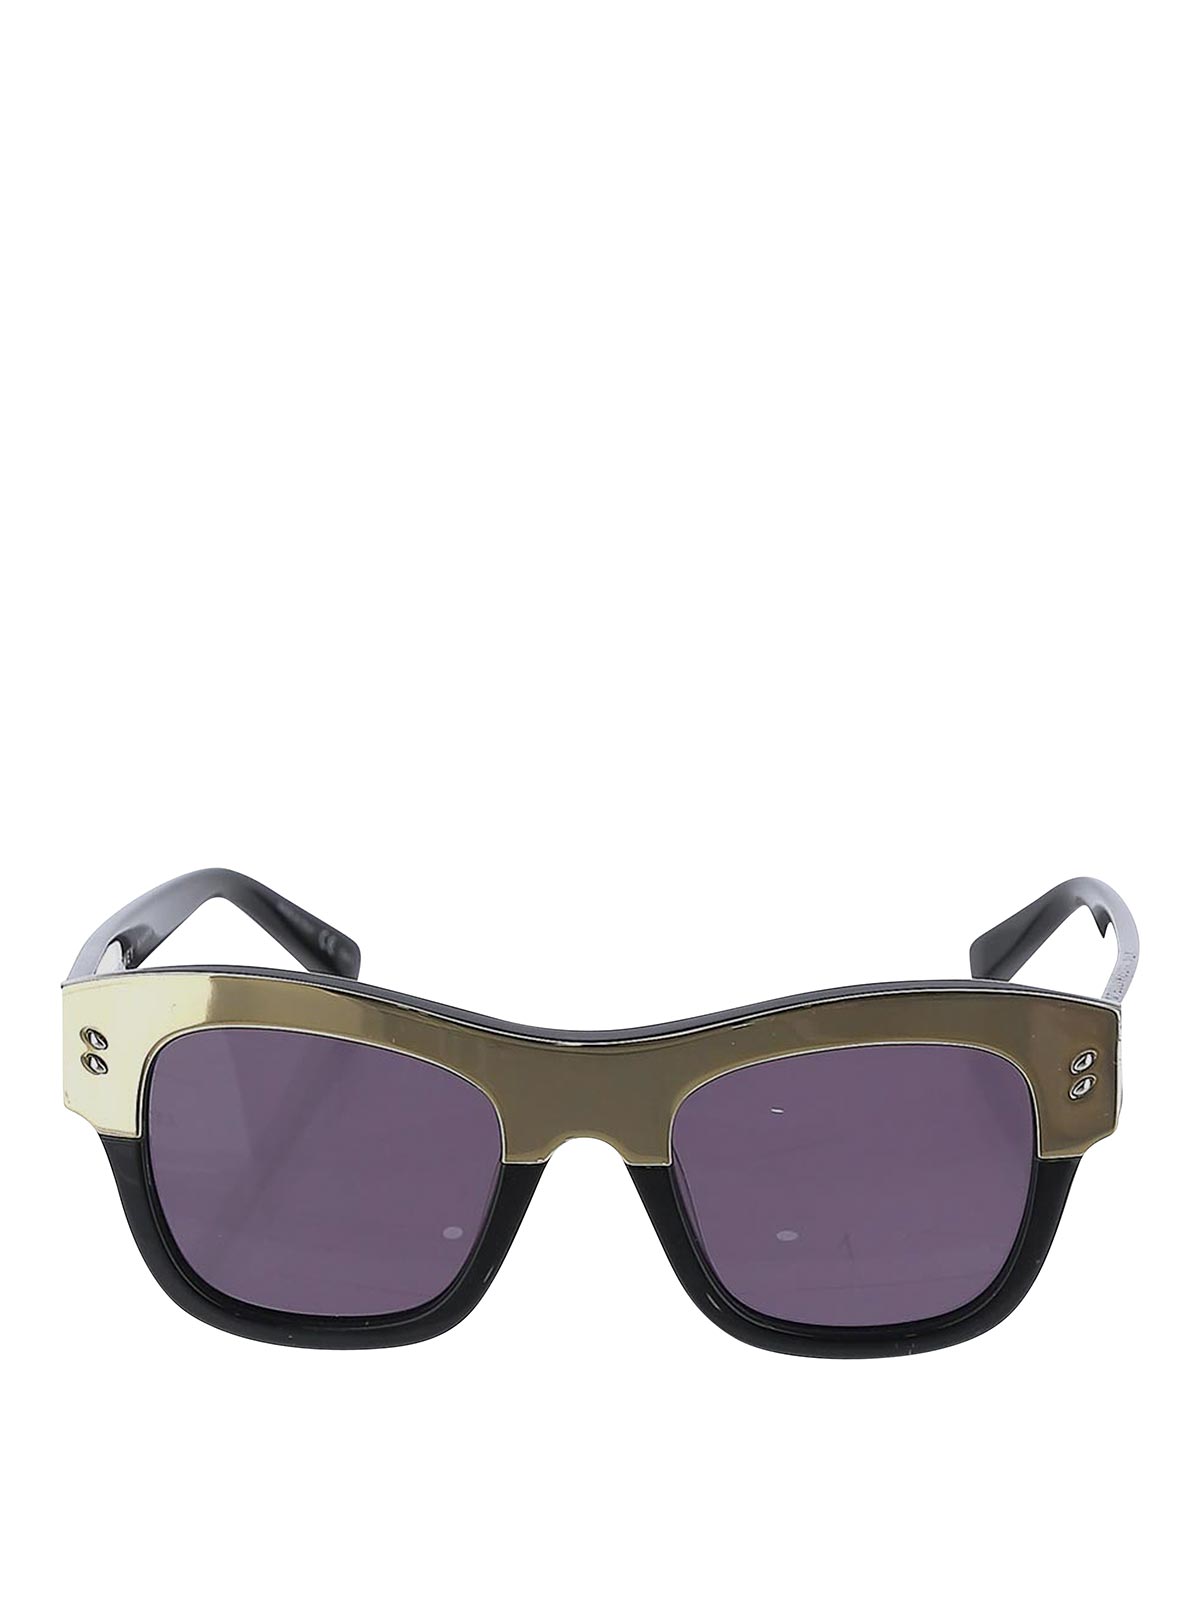 Stella Mccartney Sunglasses In Black With On The Frame